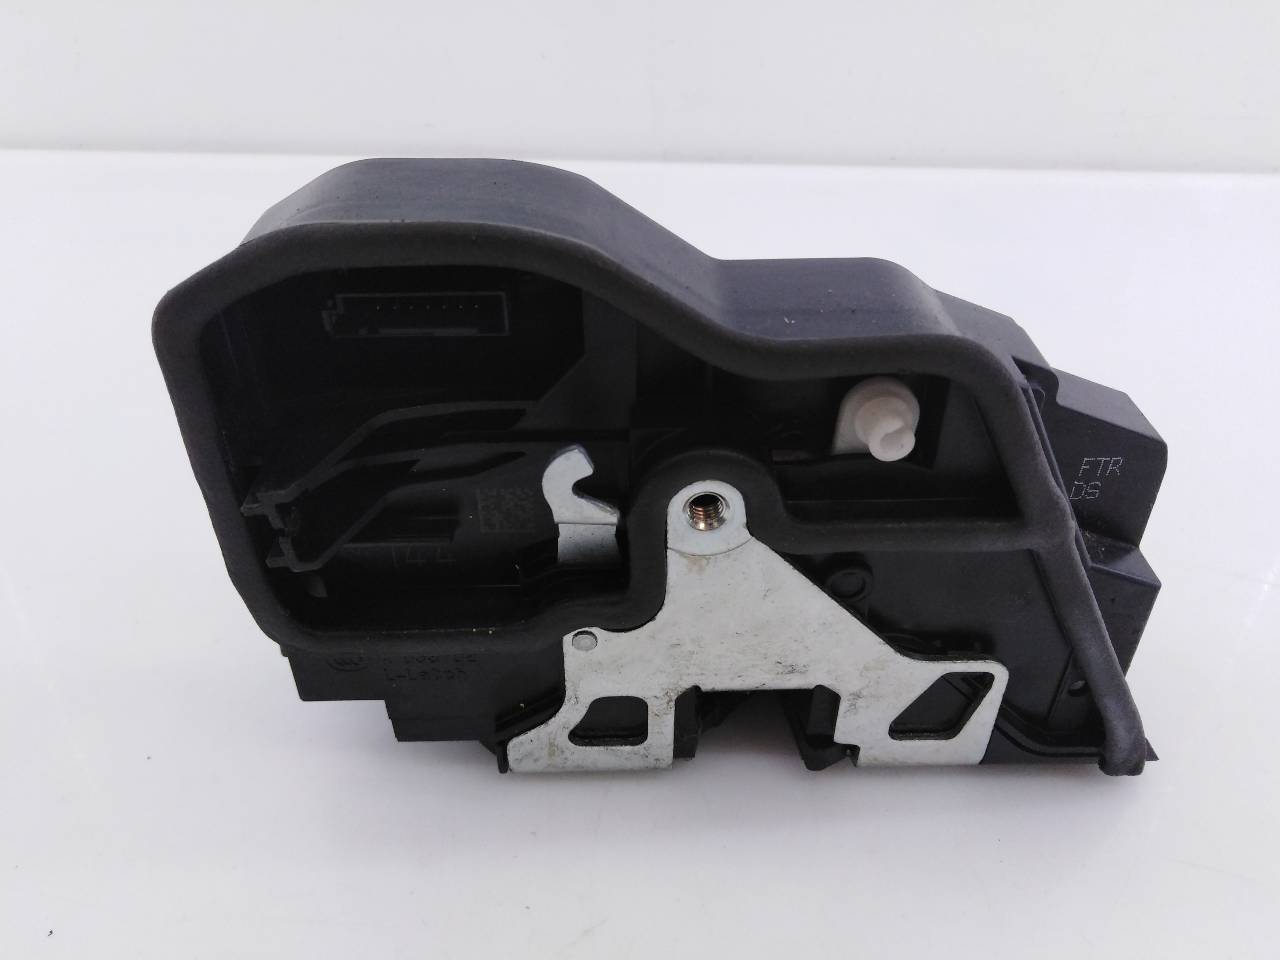 BMW 5 Series F10/F11 (2009-2017) Front Right Door Lock 7202144, E1-A3-16-2 18712668